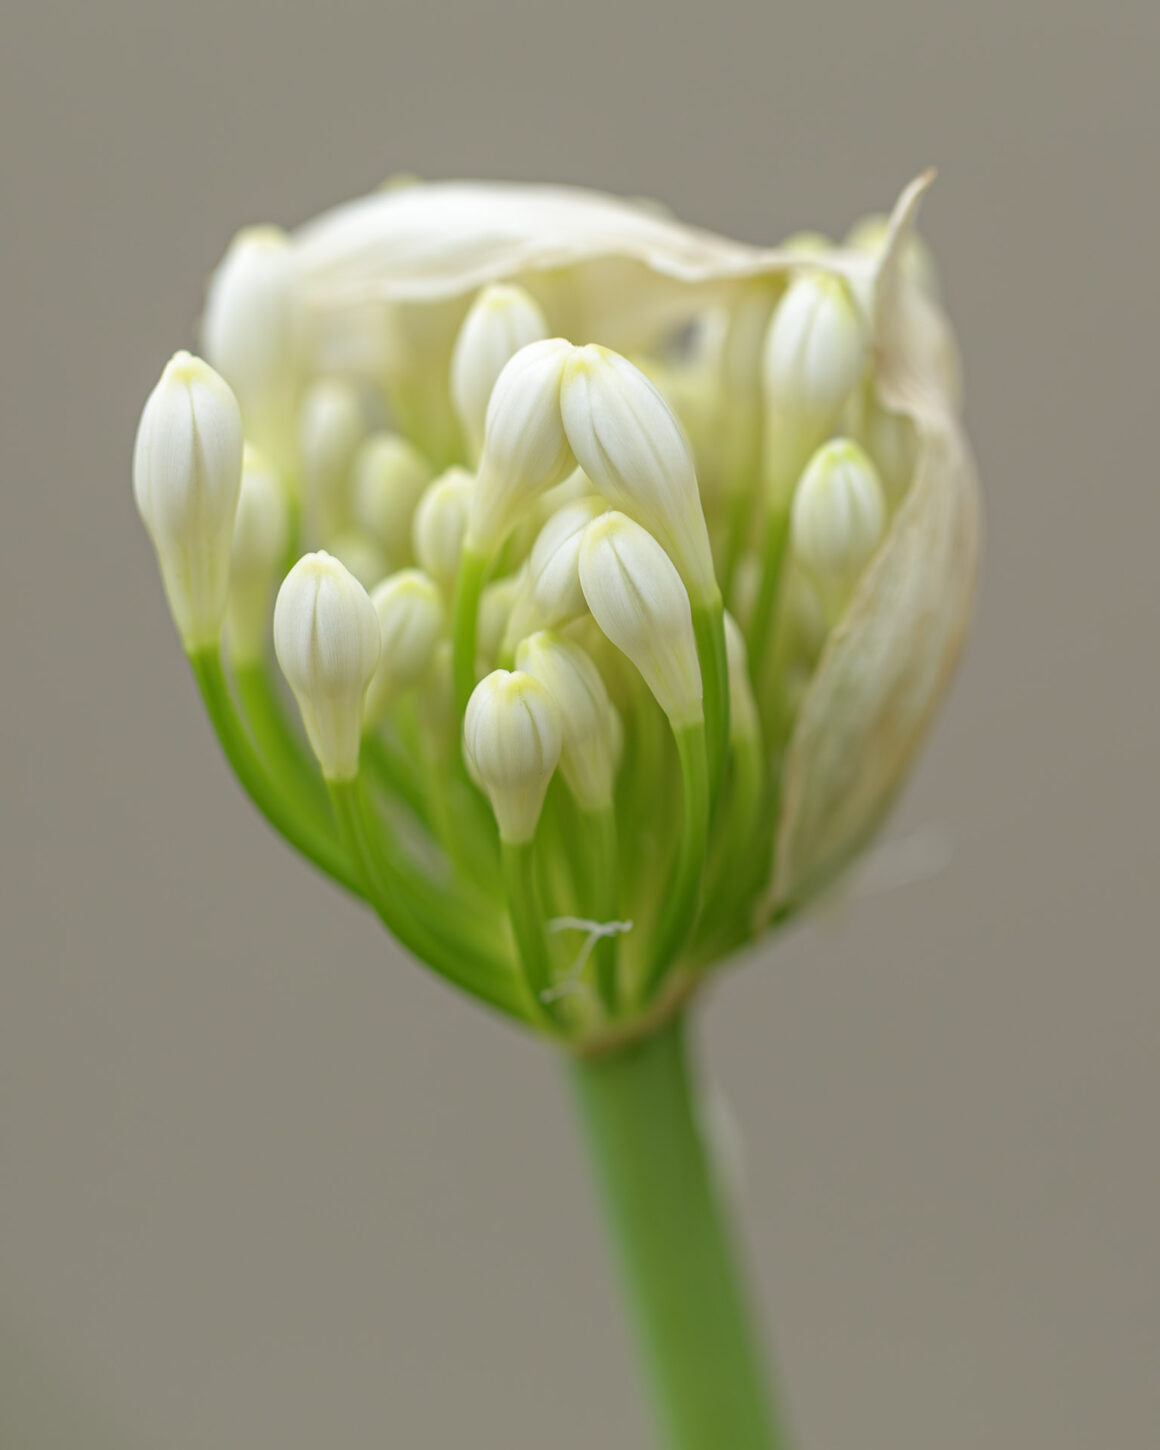 African Lily / Lily of the Nile (Agapanthus praecox)